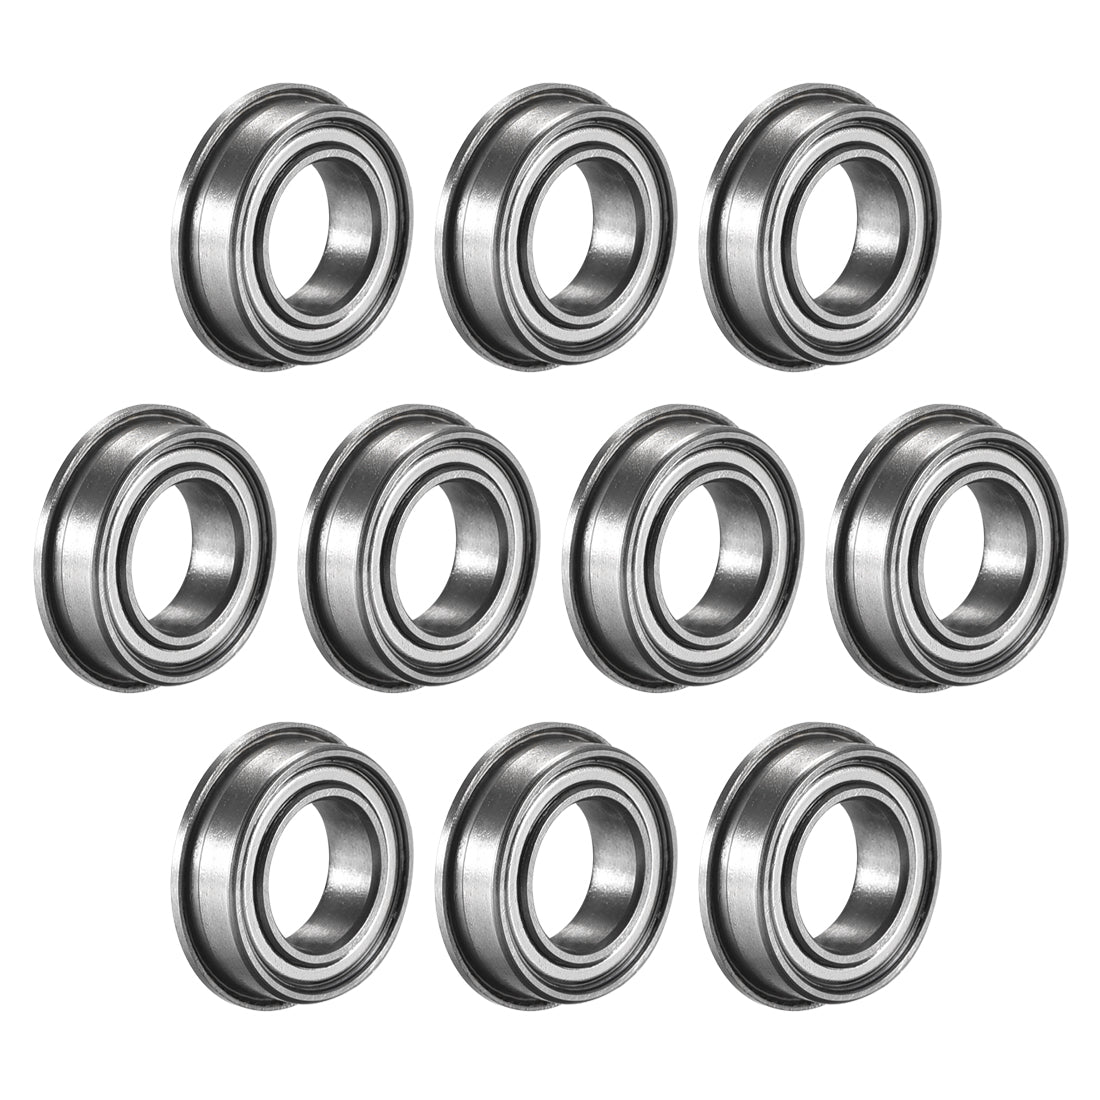 uxcell Uxcell Flange Ball Bearing Double Shielded Chrome Steel Bearing